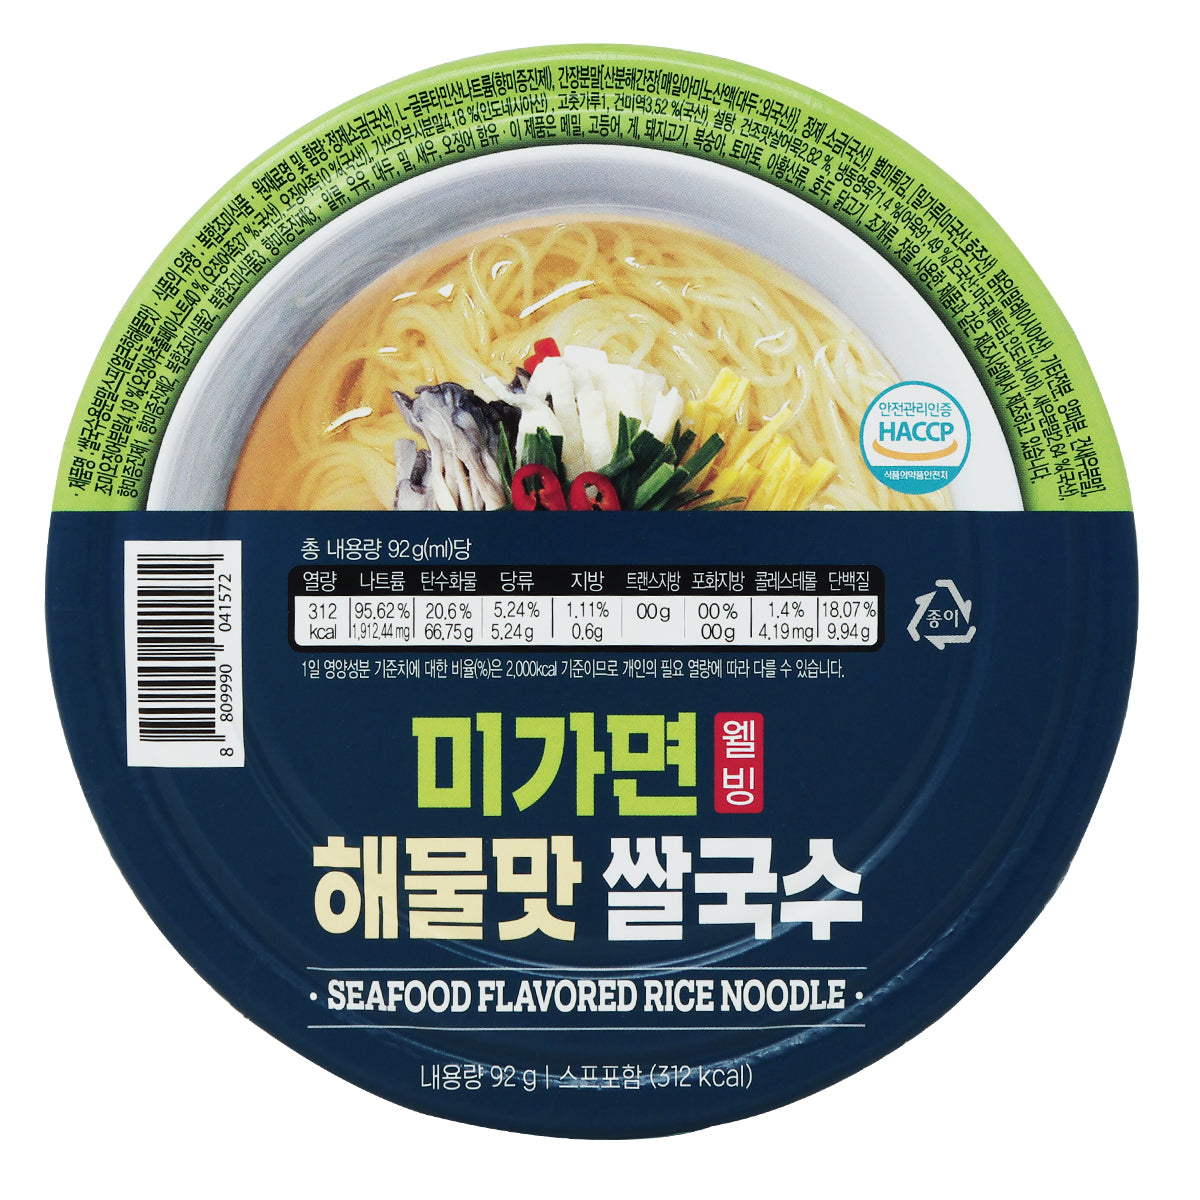 SEAFOOD FLAVORED RICE NOODLE 해물맛 쌀국수